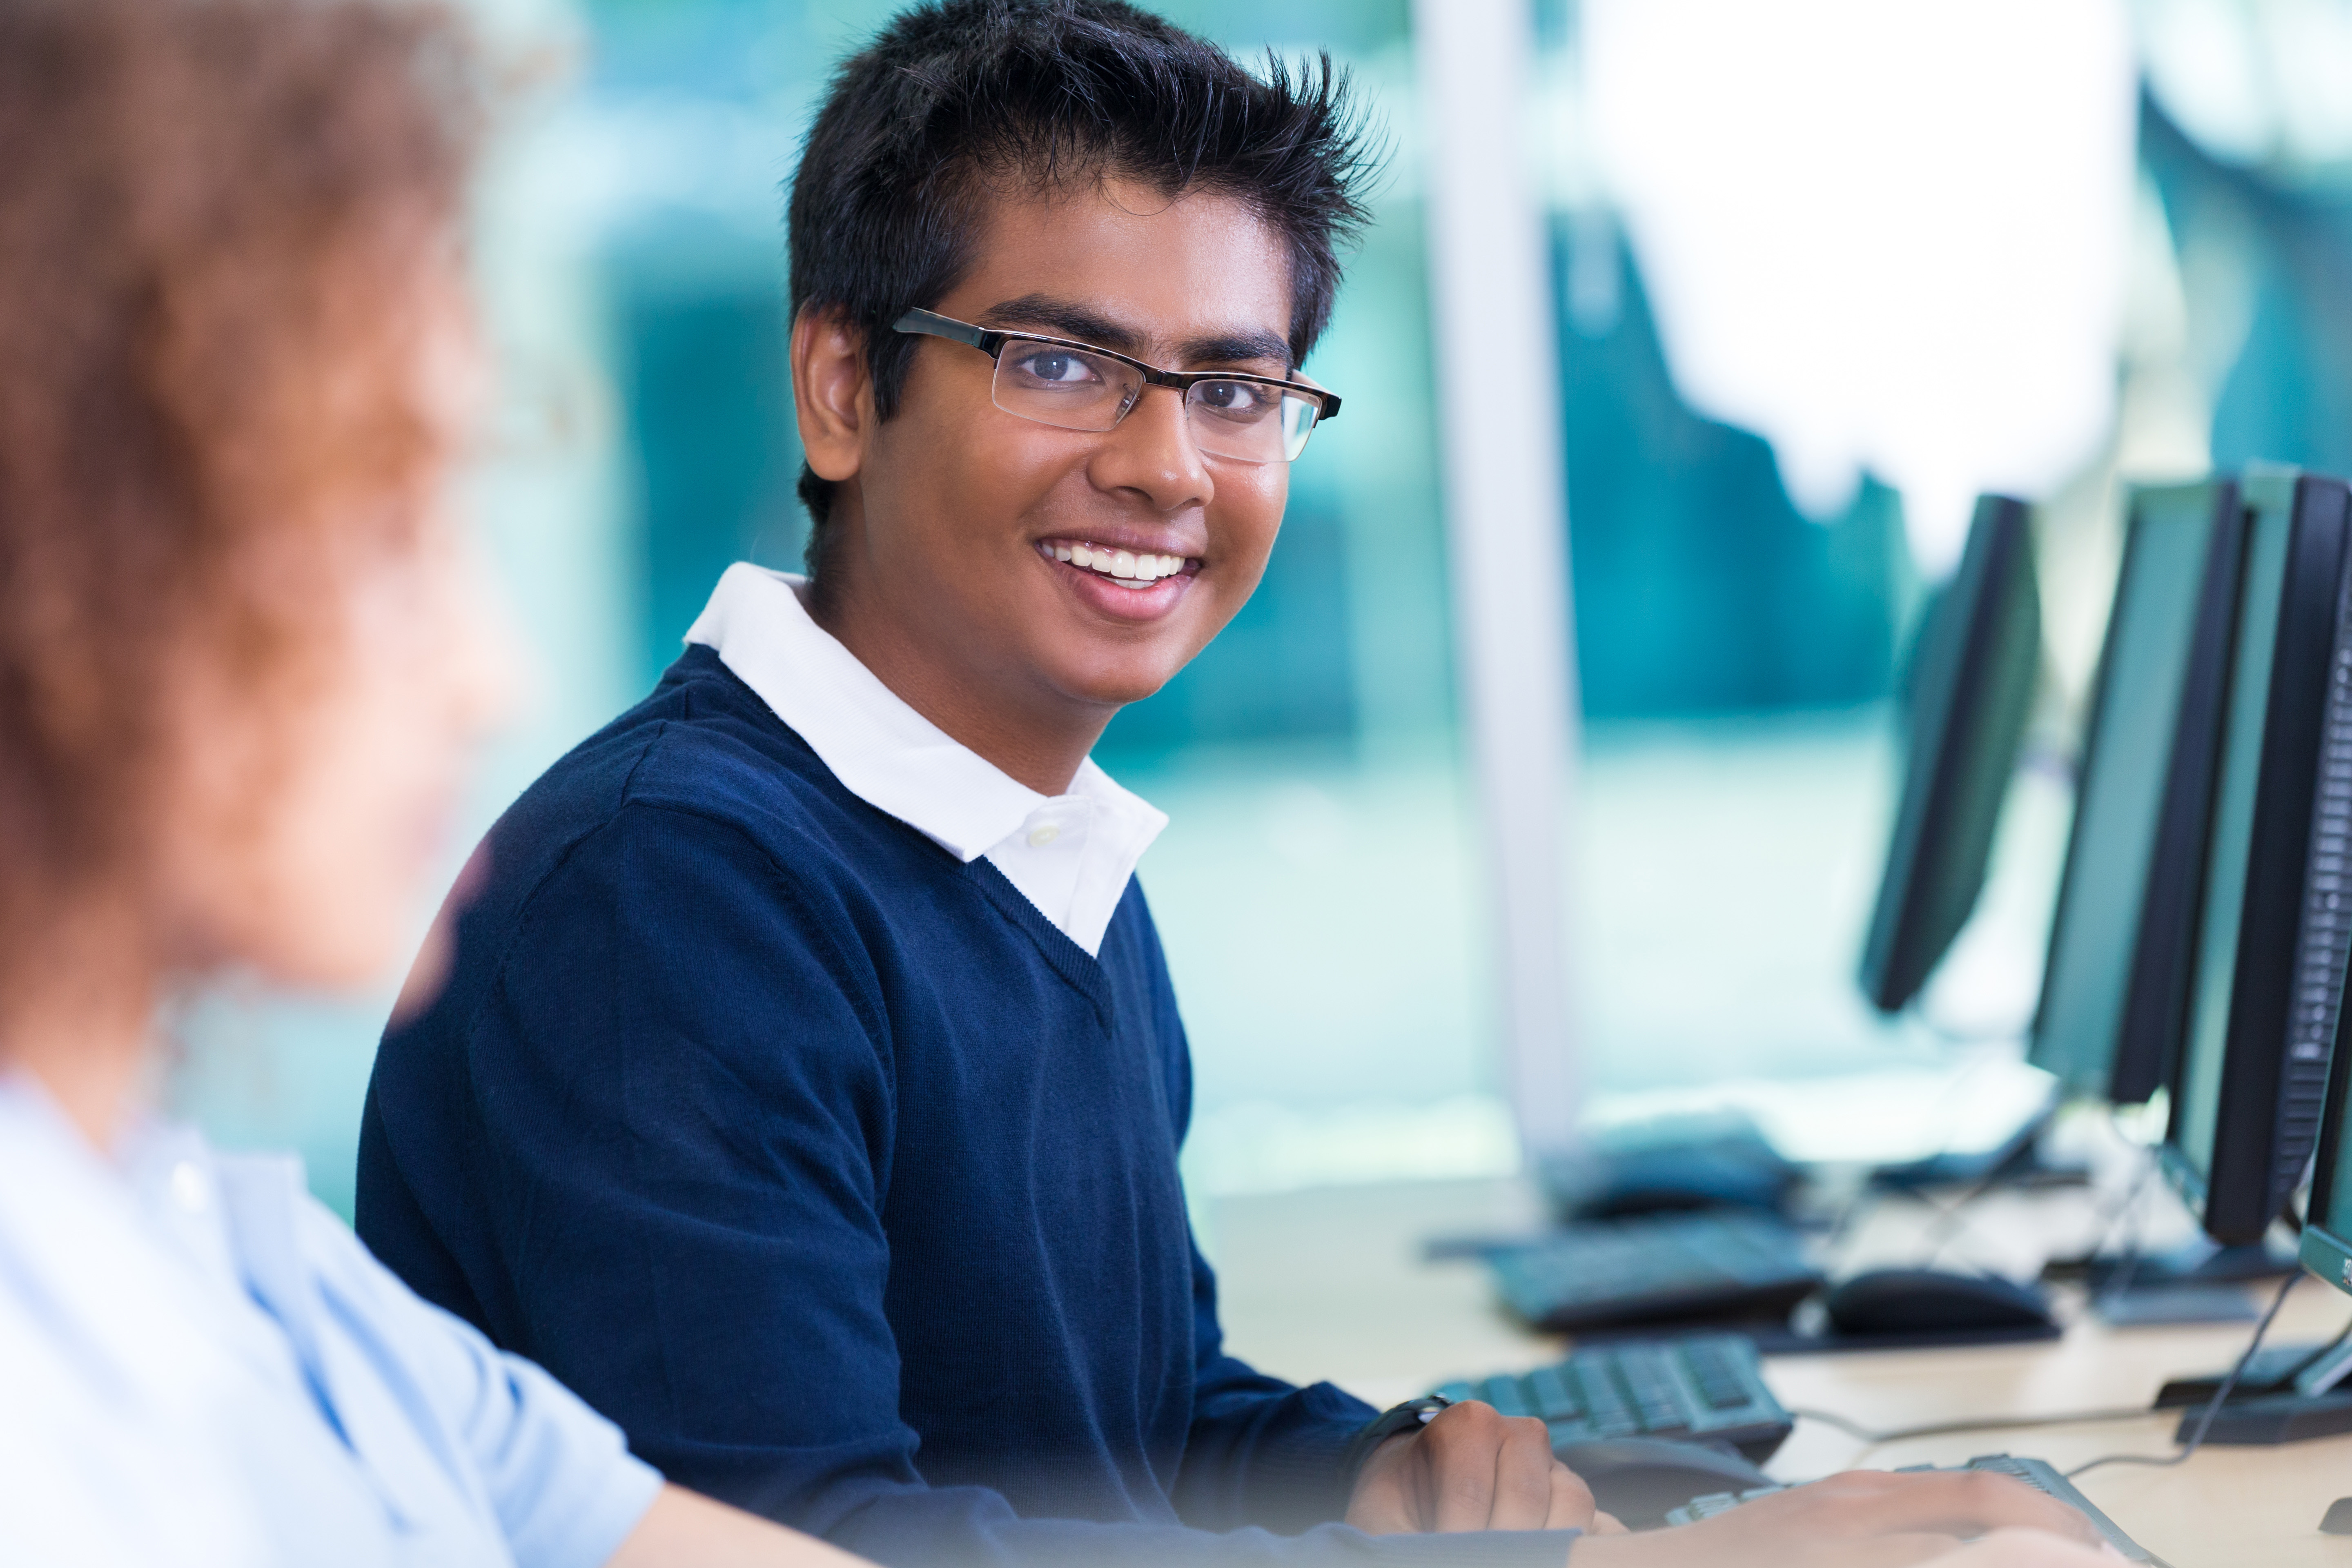 Male student smiling and sitting behind a computer 